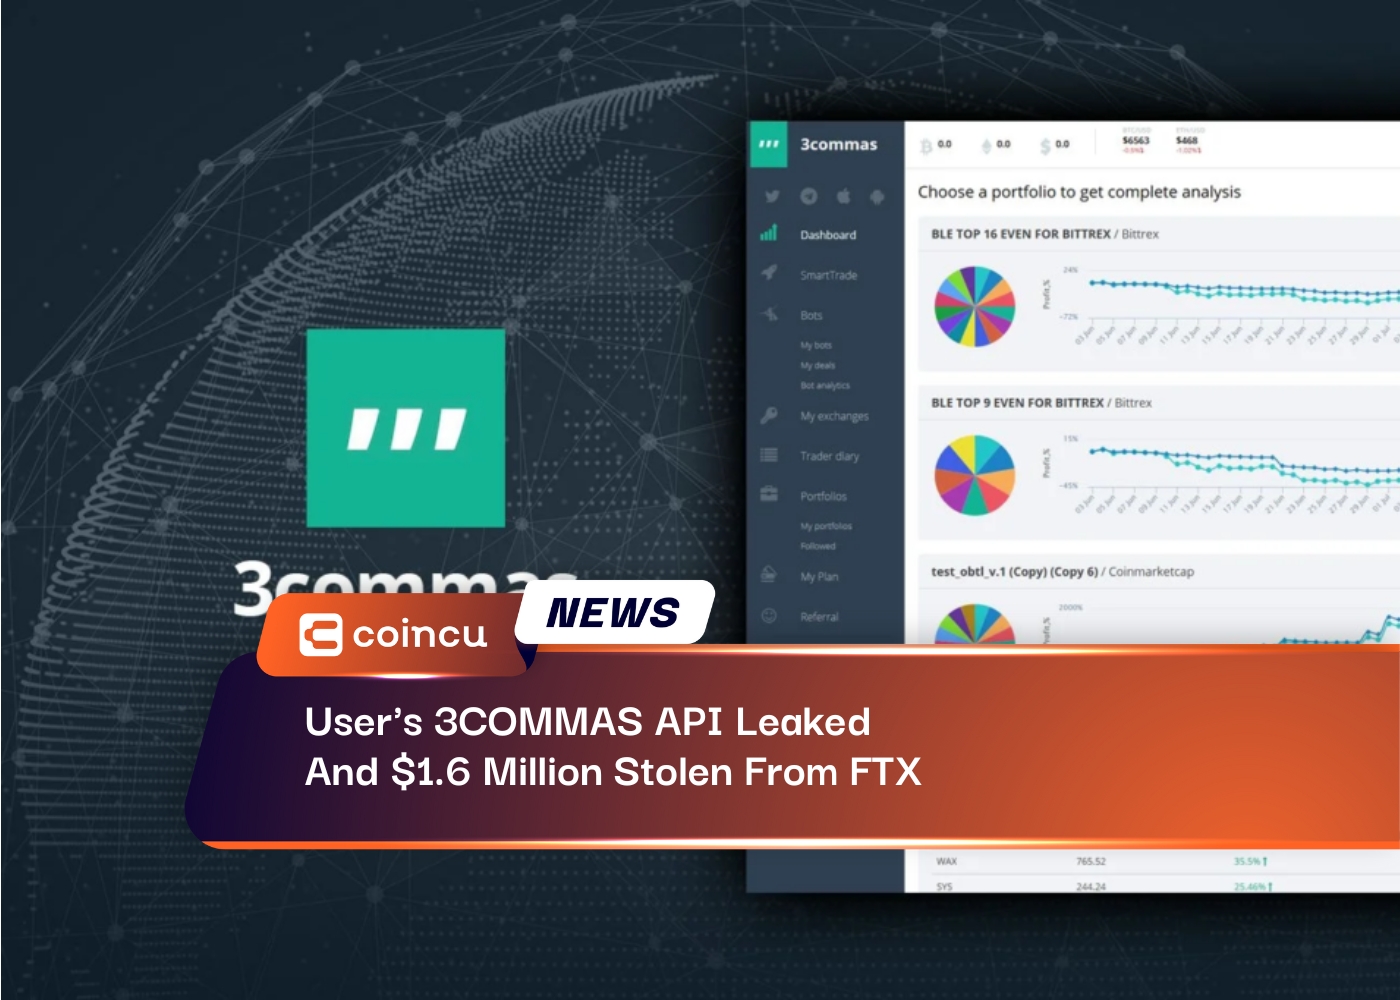 User's 3COMMAS API Leaked And $1.6 Million Stolen From FTX